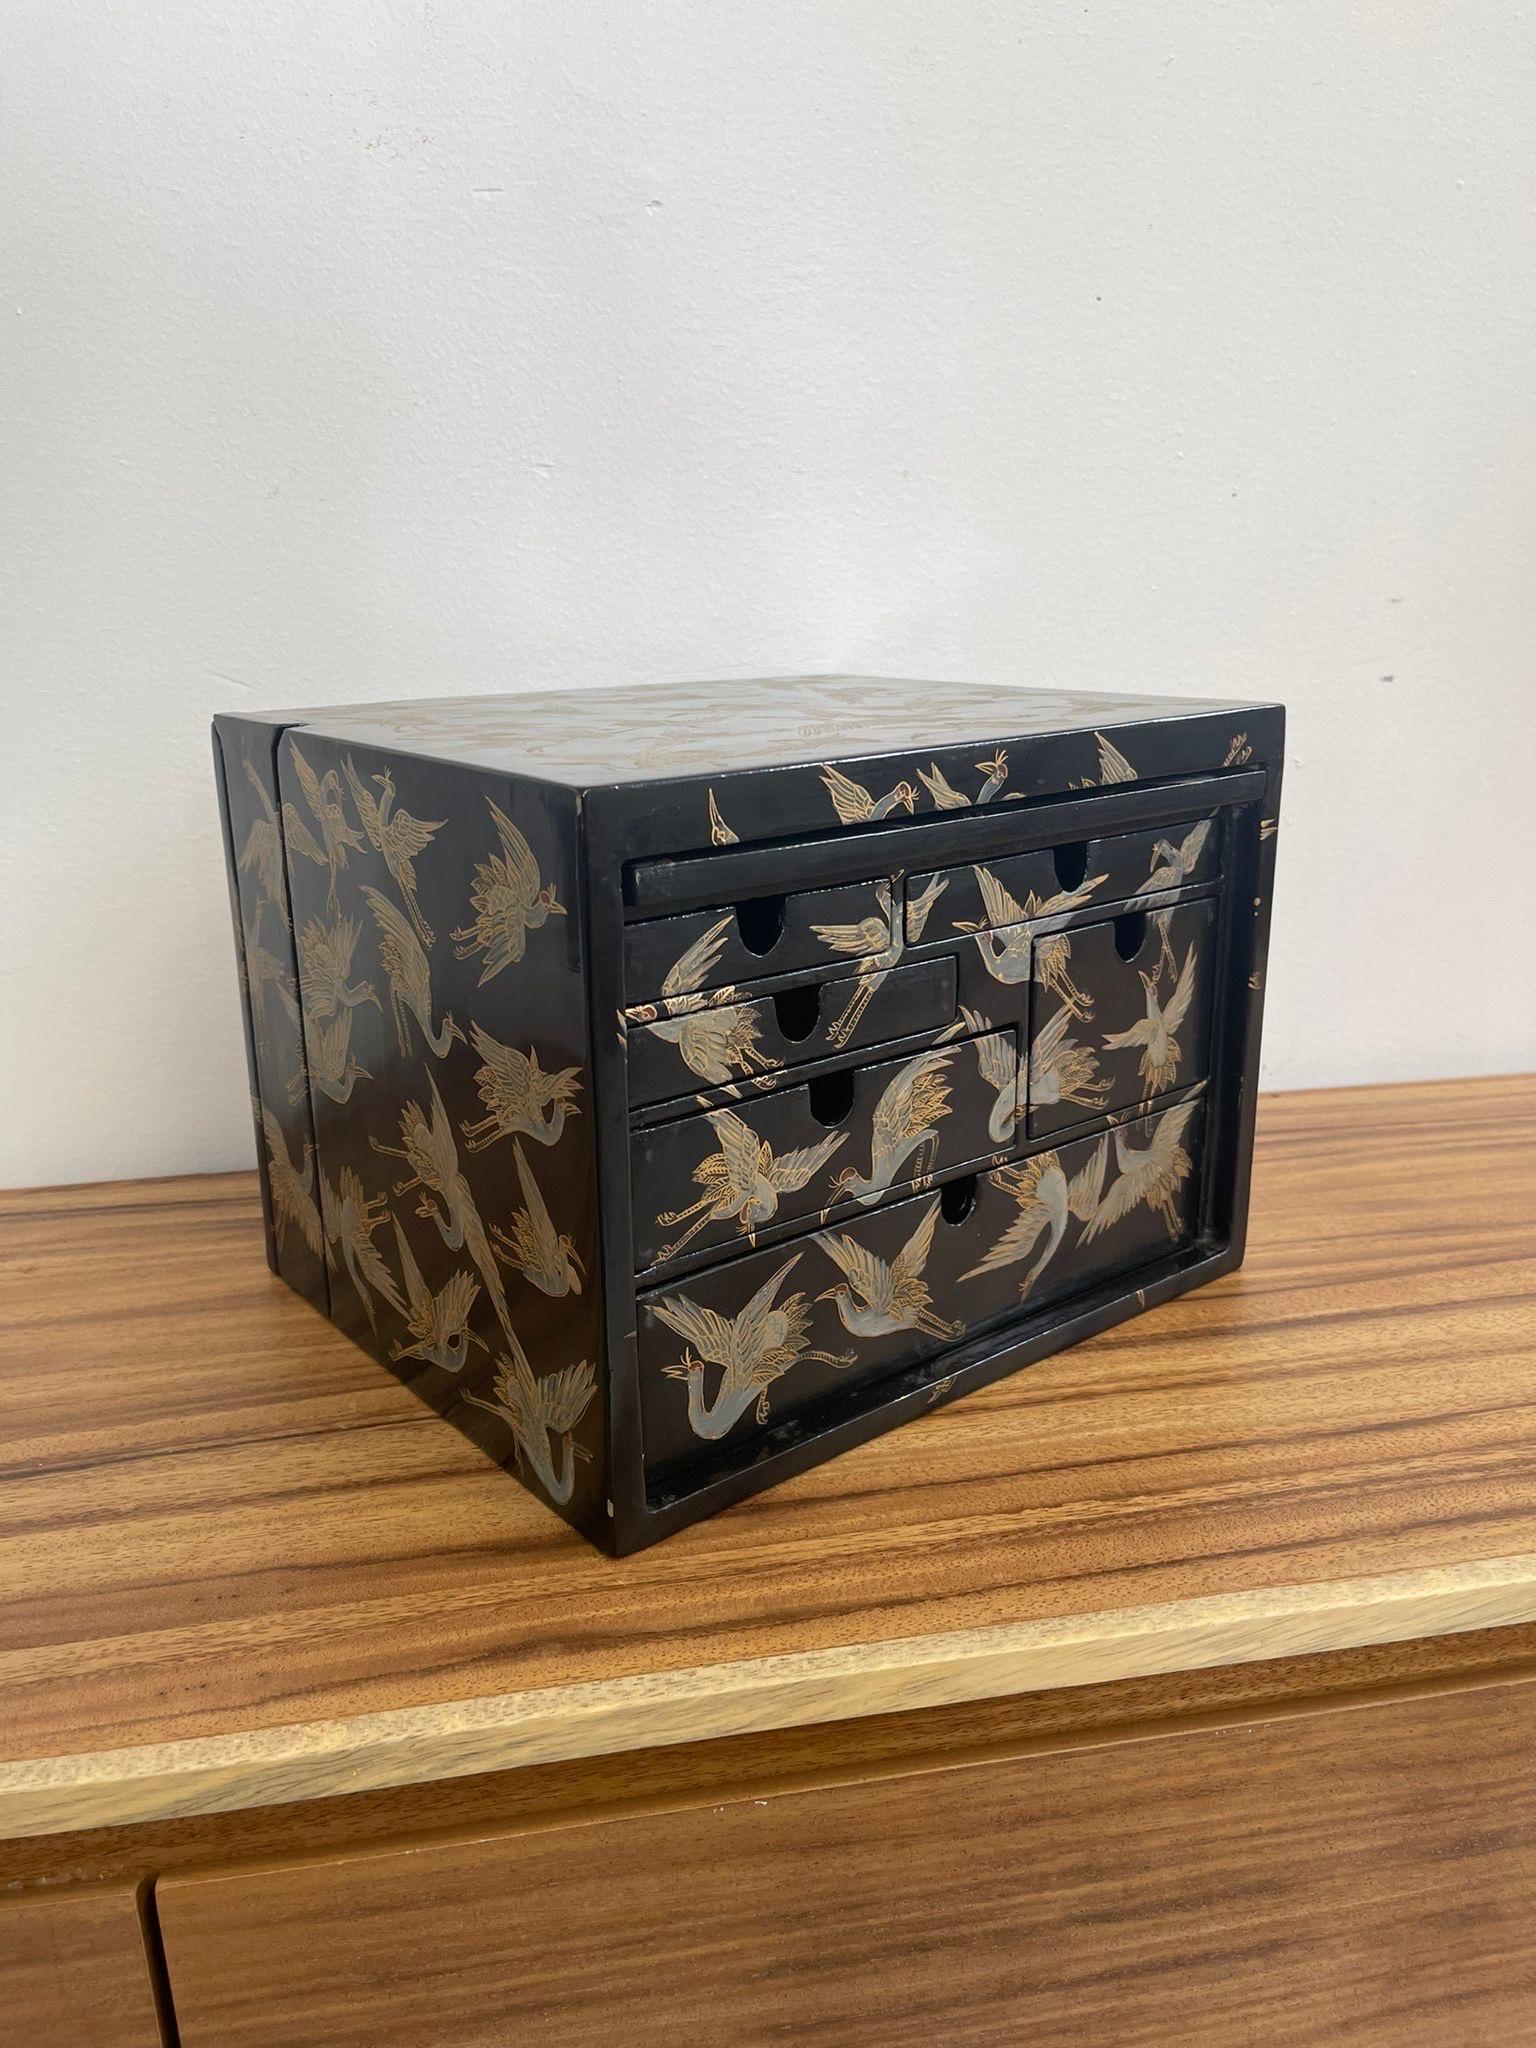 This beautiful piece is covered in crane images, even the inside of the drawers have them. Two compartments for drawers, one revealed through a hinge door and the other through sliding a panel of the exterior box up. The Box is wooden. May be